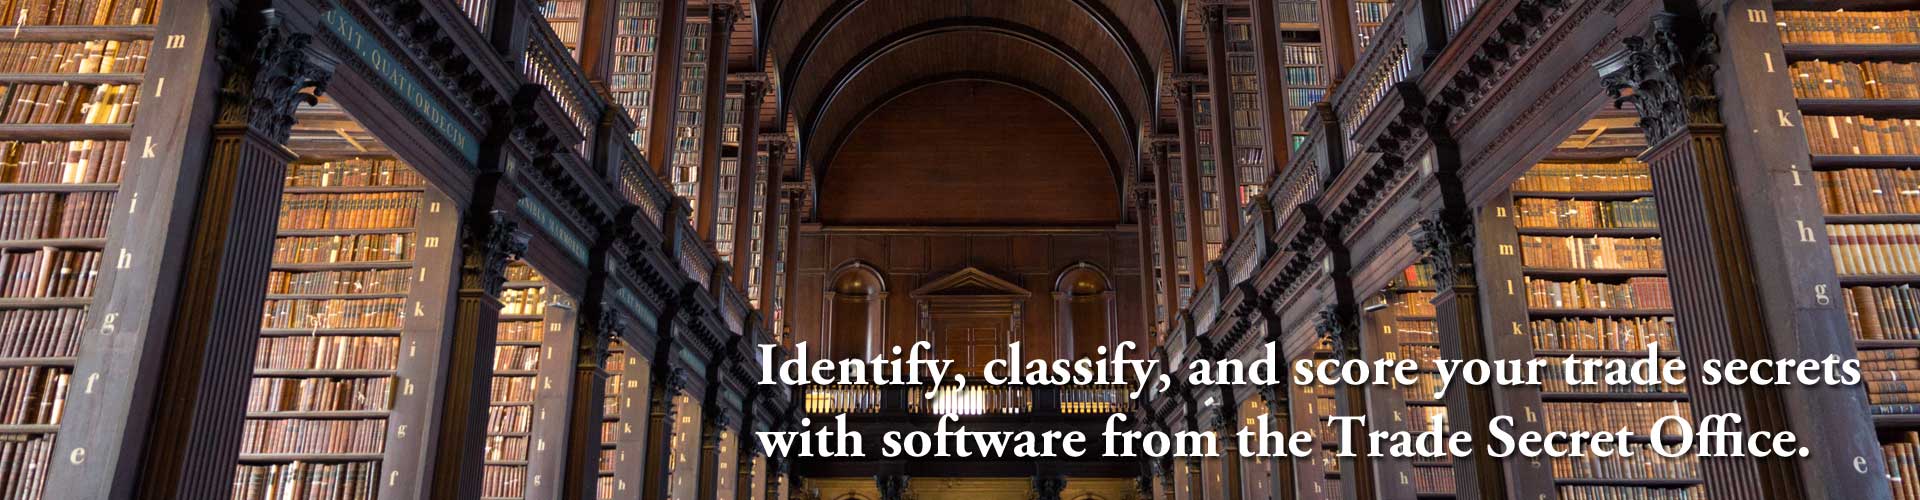 Identify, classify, and score your trade secrets with software from the Trade Secret Office.